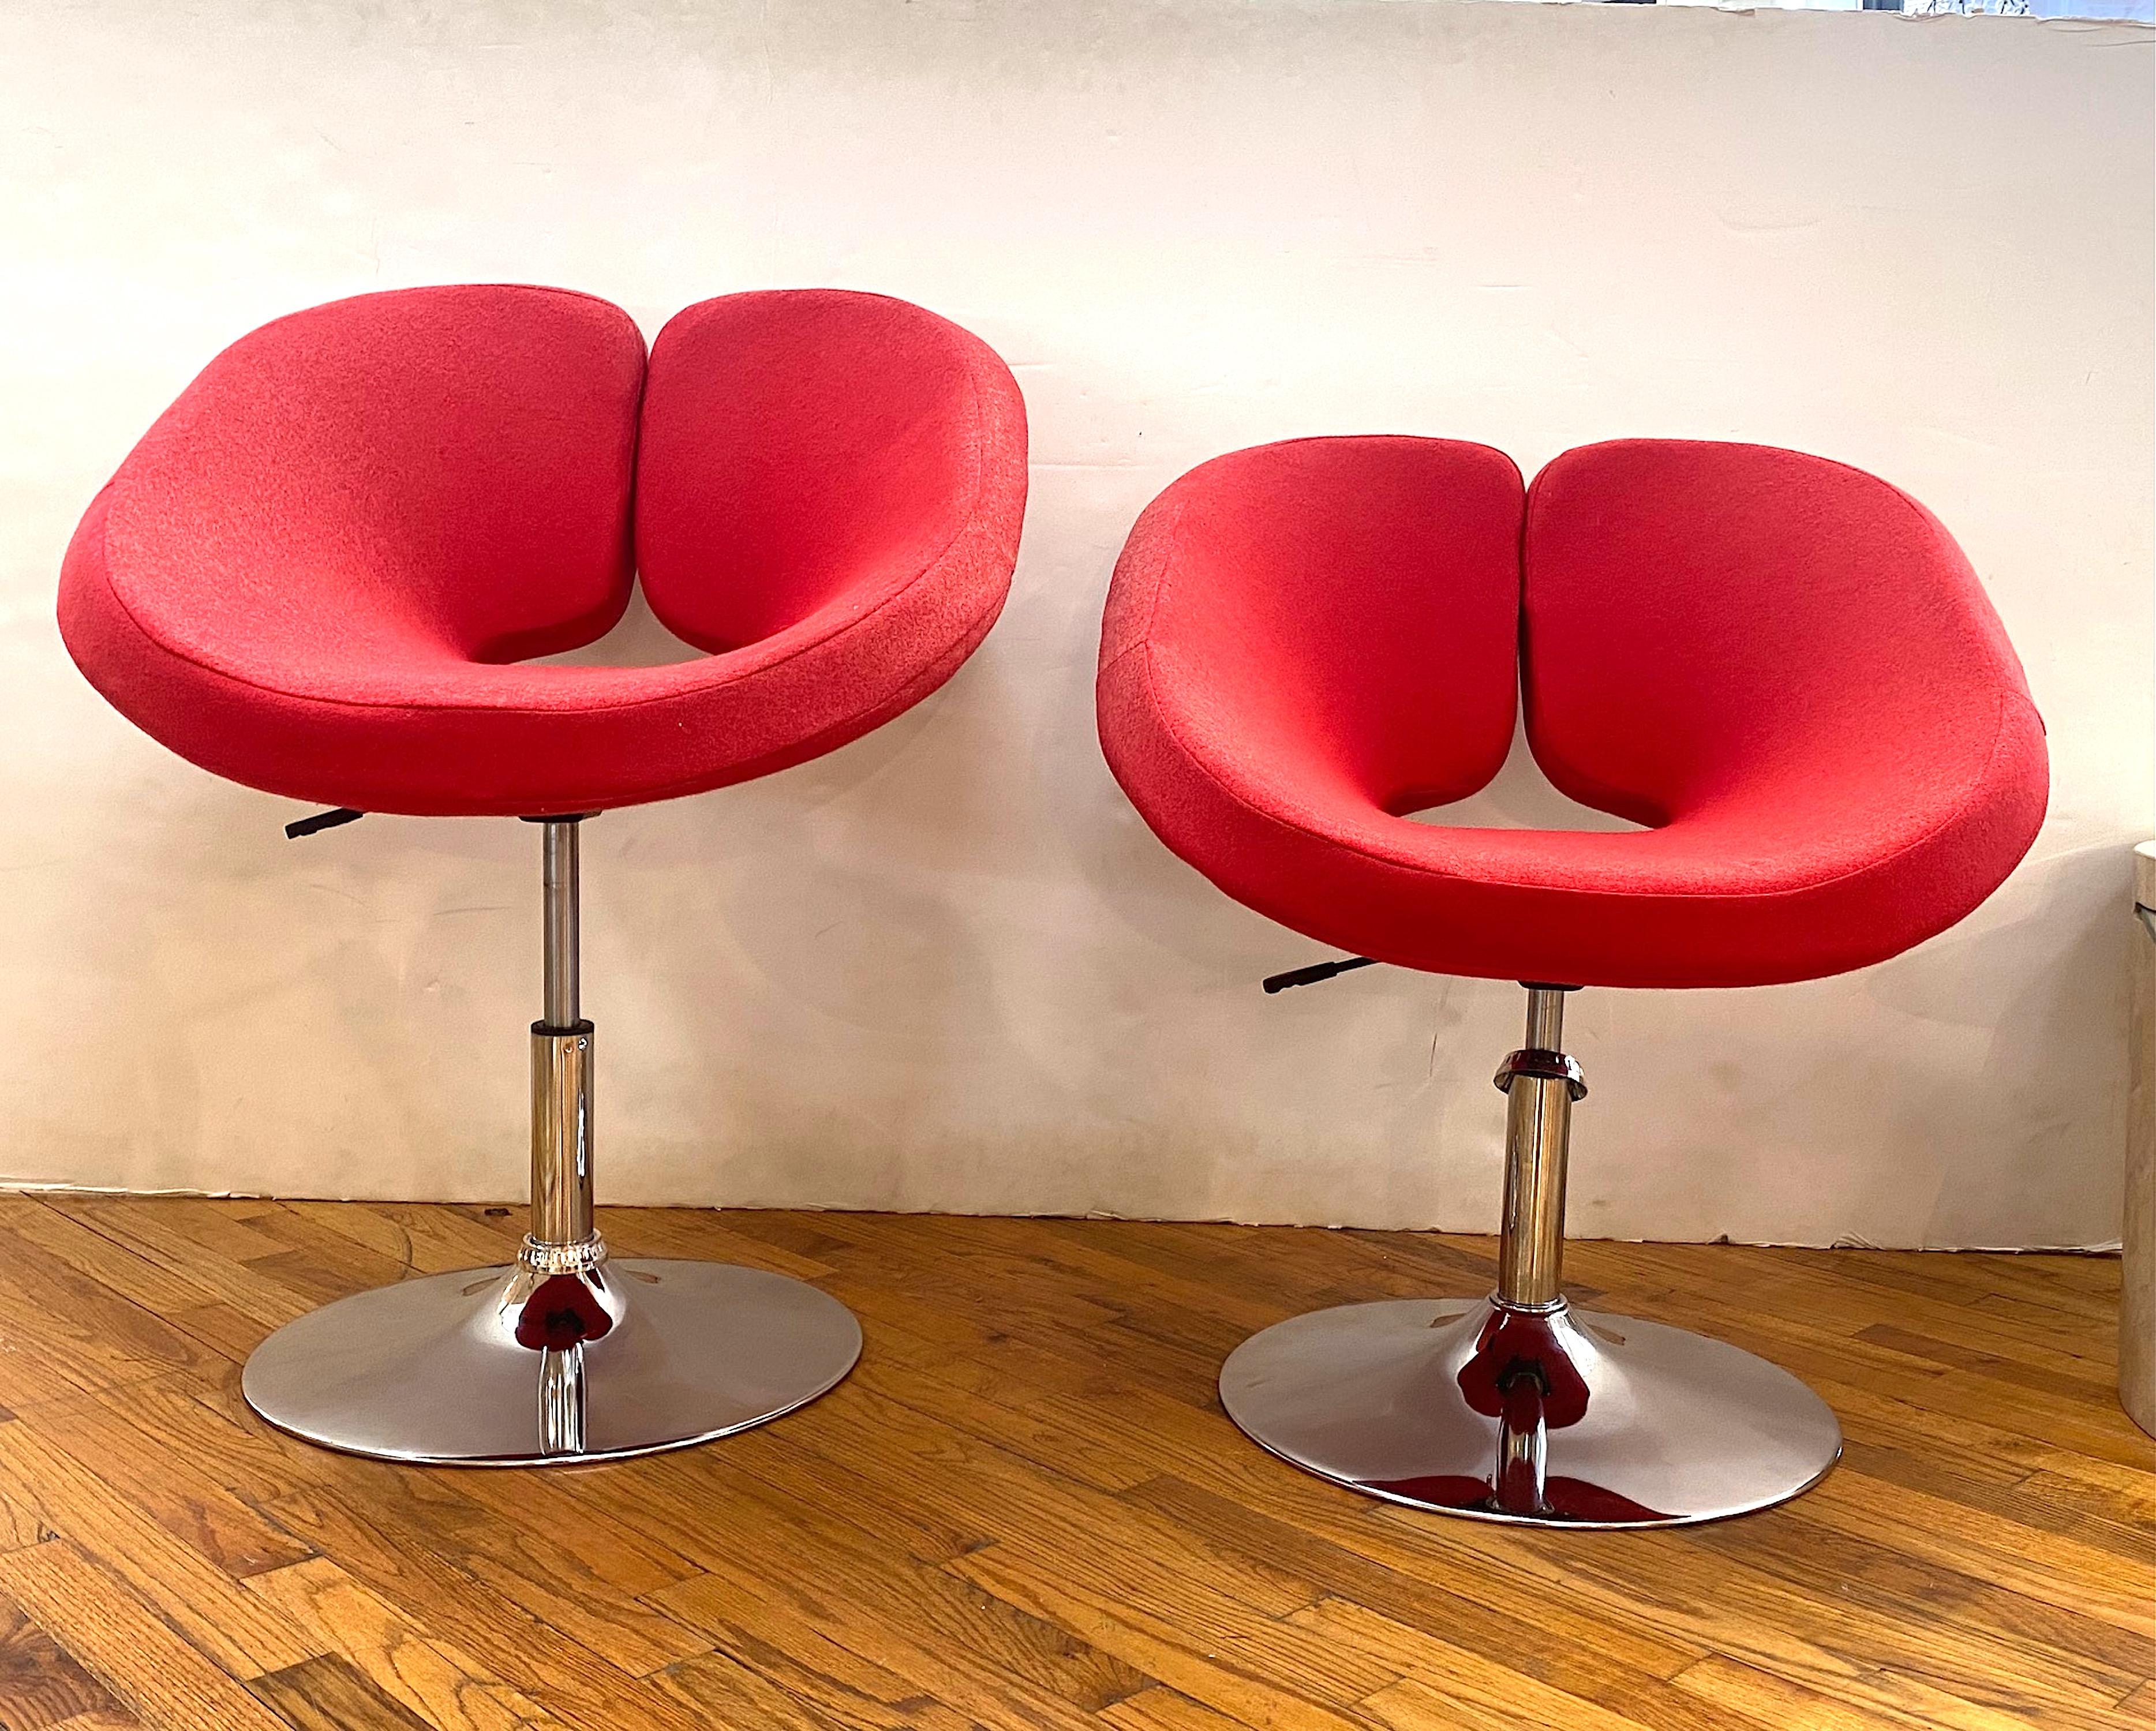 American Pair of 1980s Modern Design Adjustable Red Ribbon Chairs